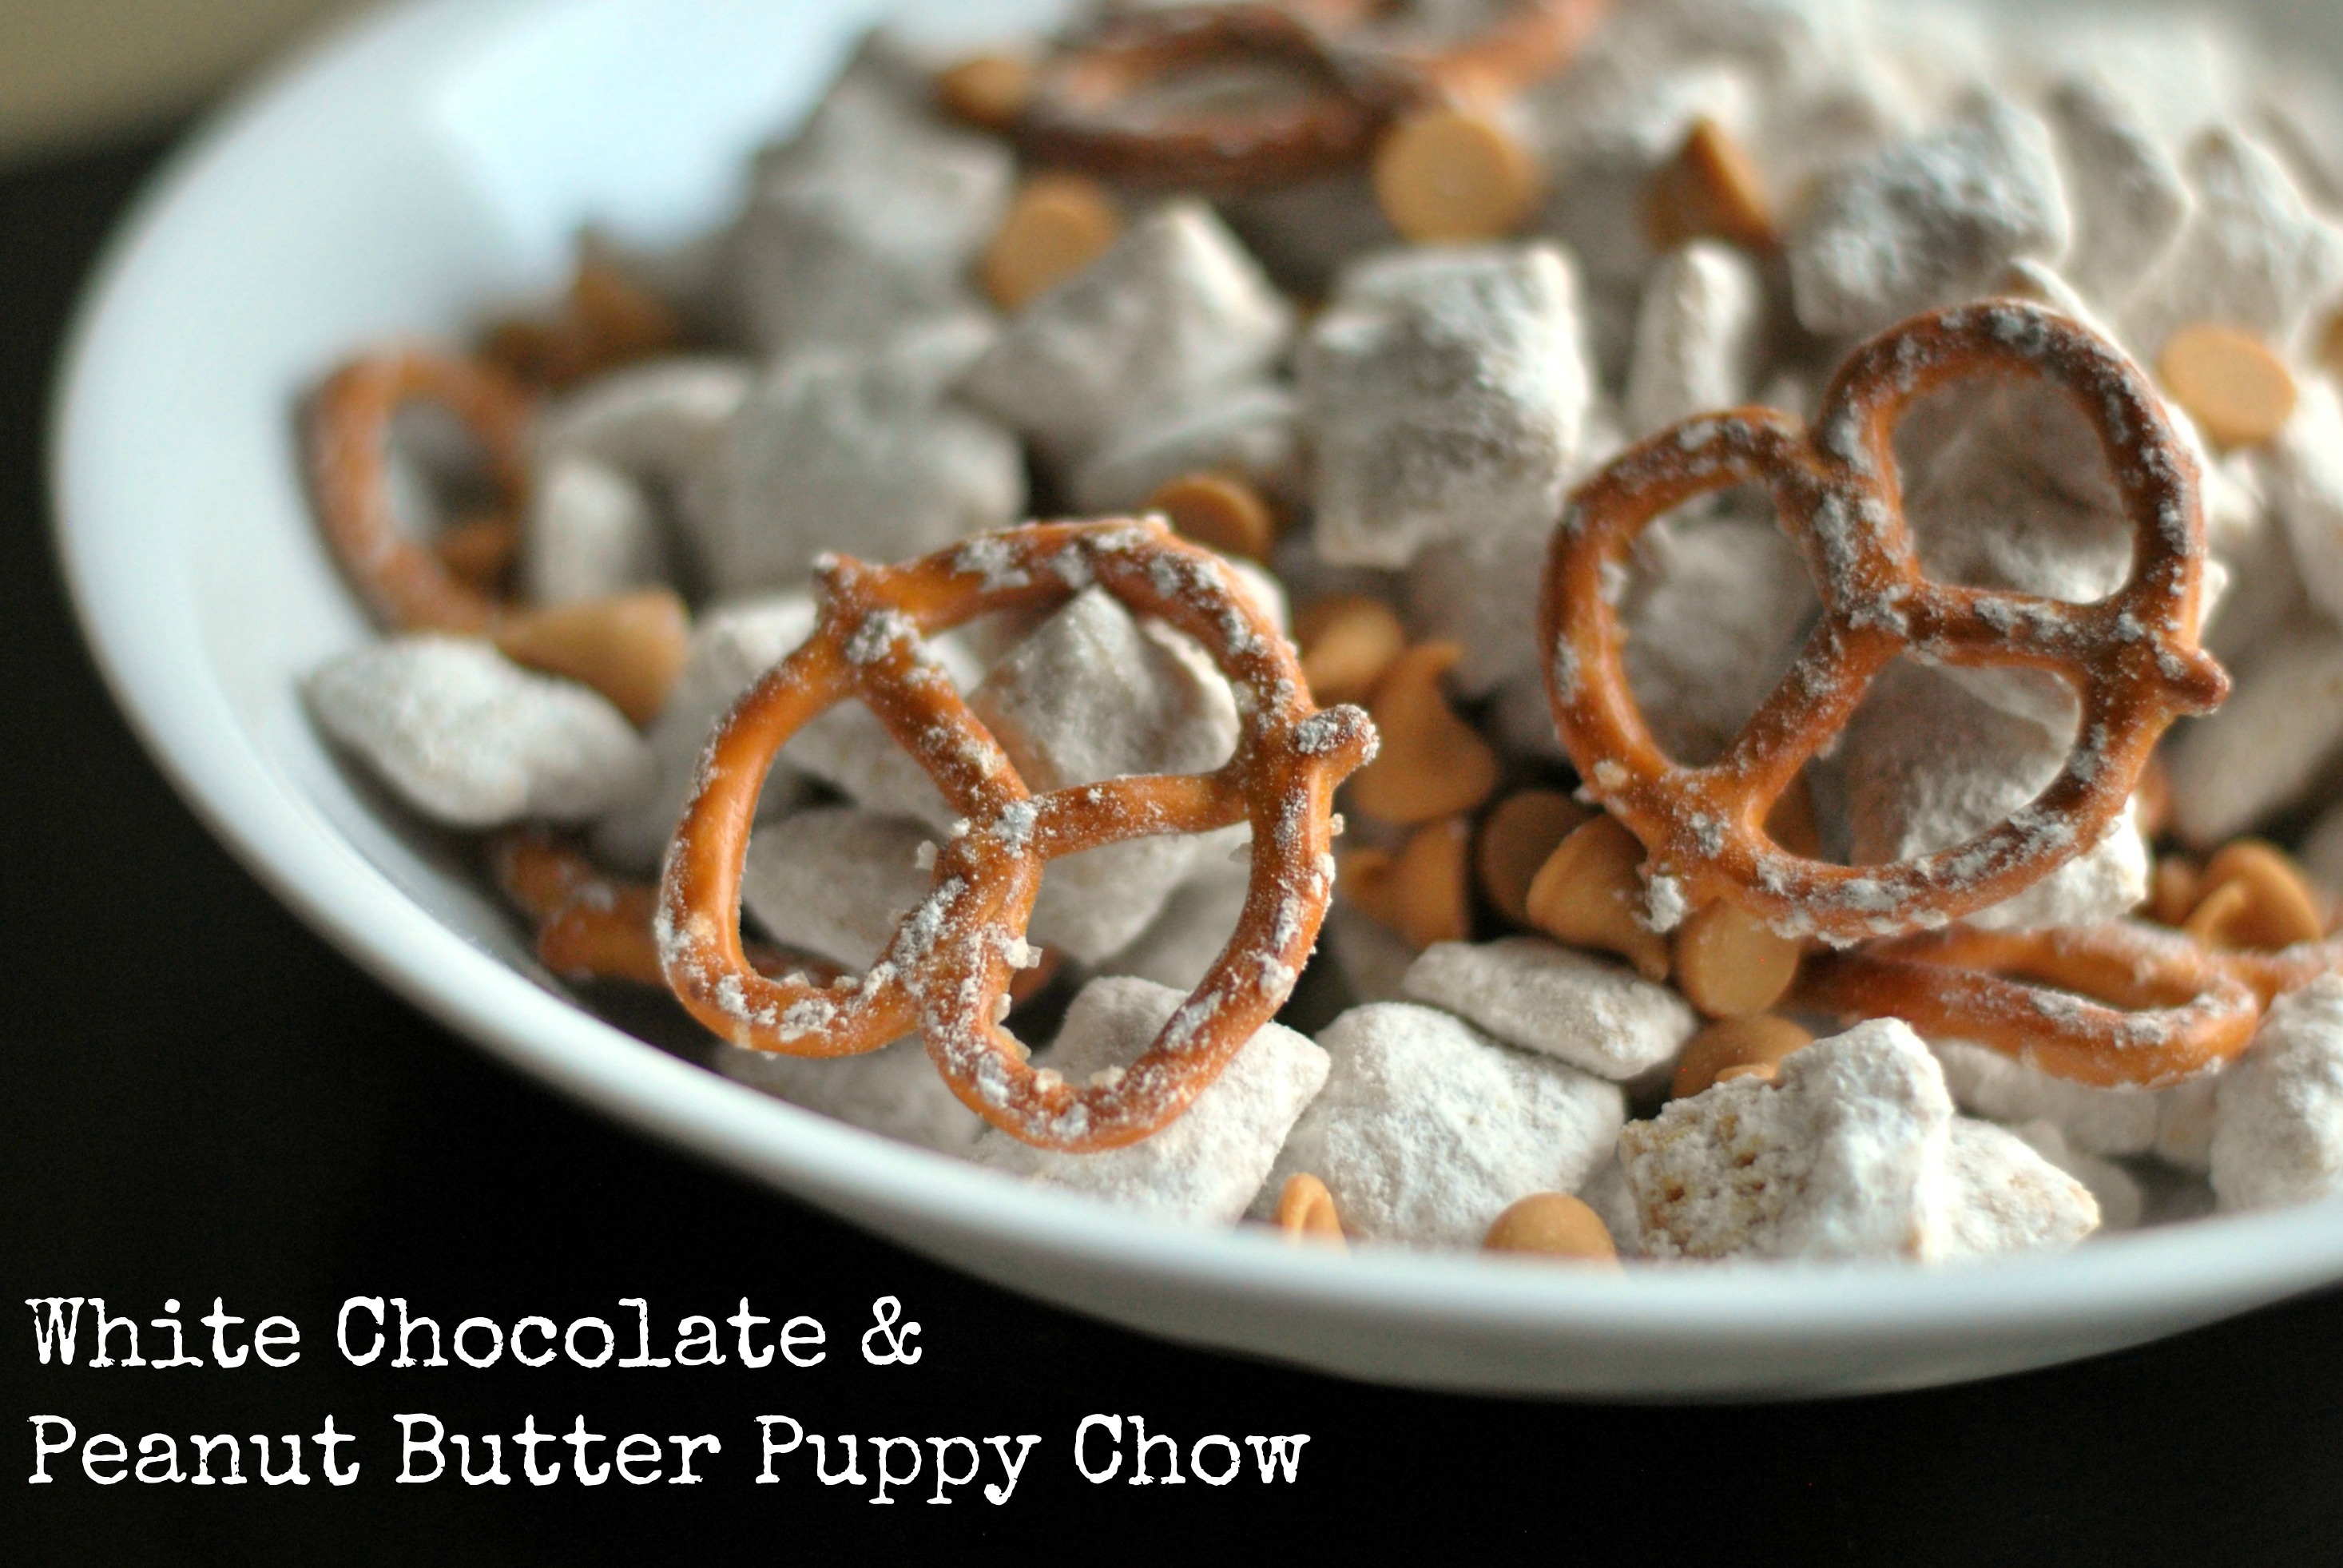 White Chocolate & Peanut Butter Puppy Chow